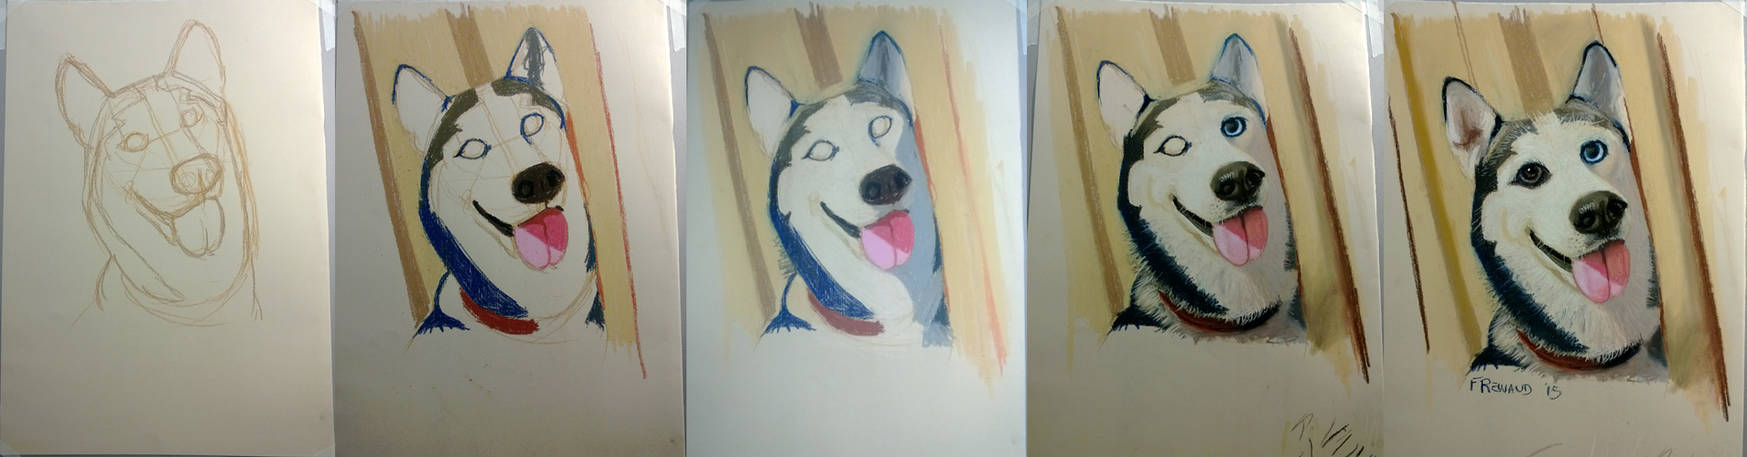 Steps painting husky with dry pastels